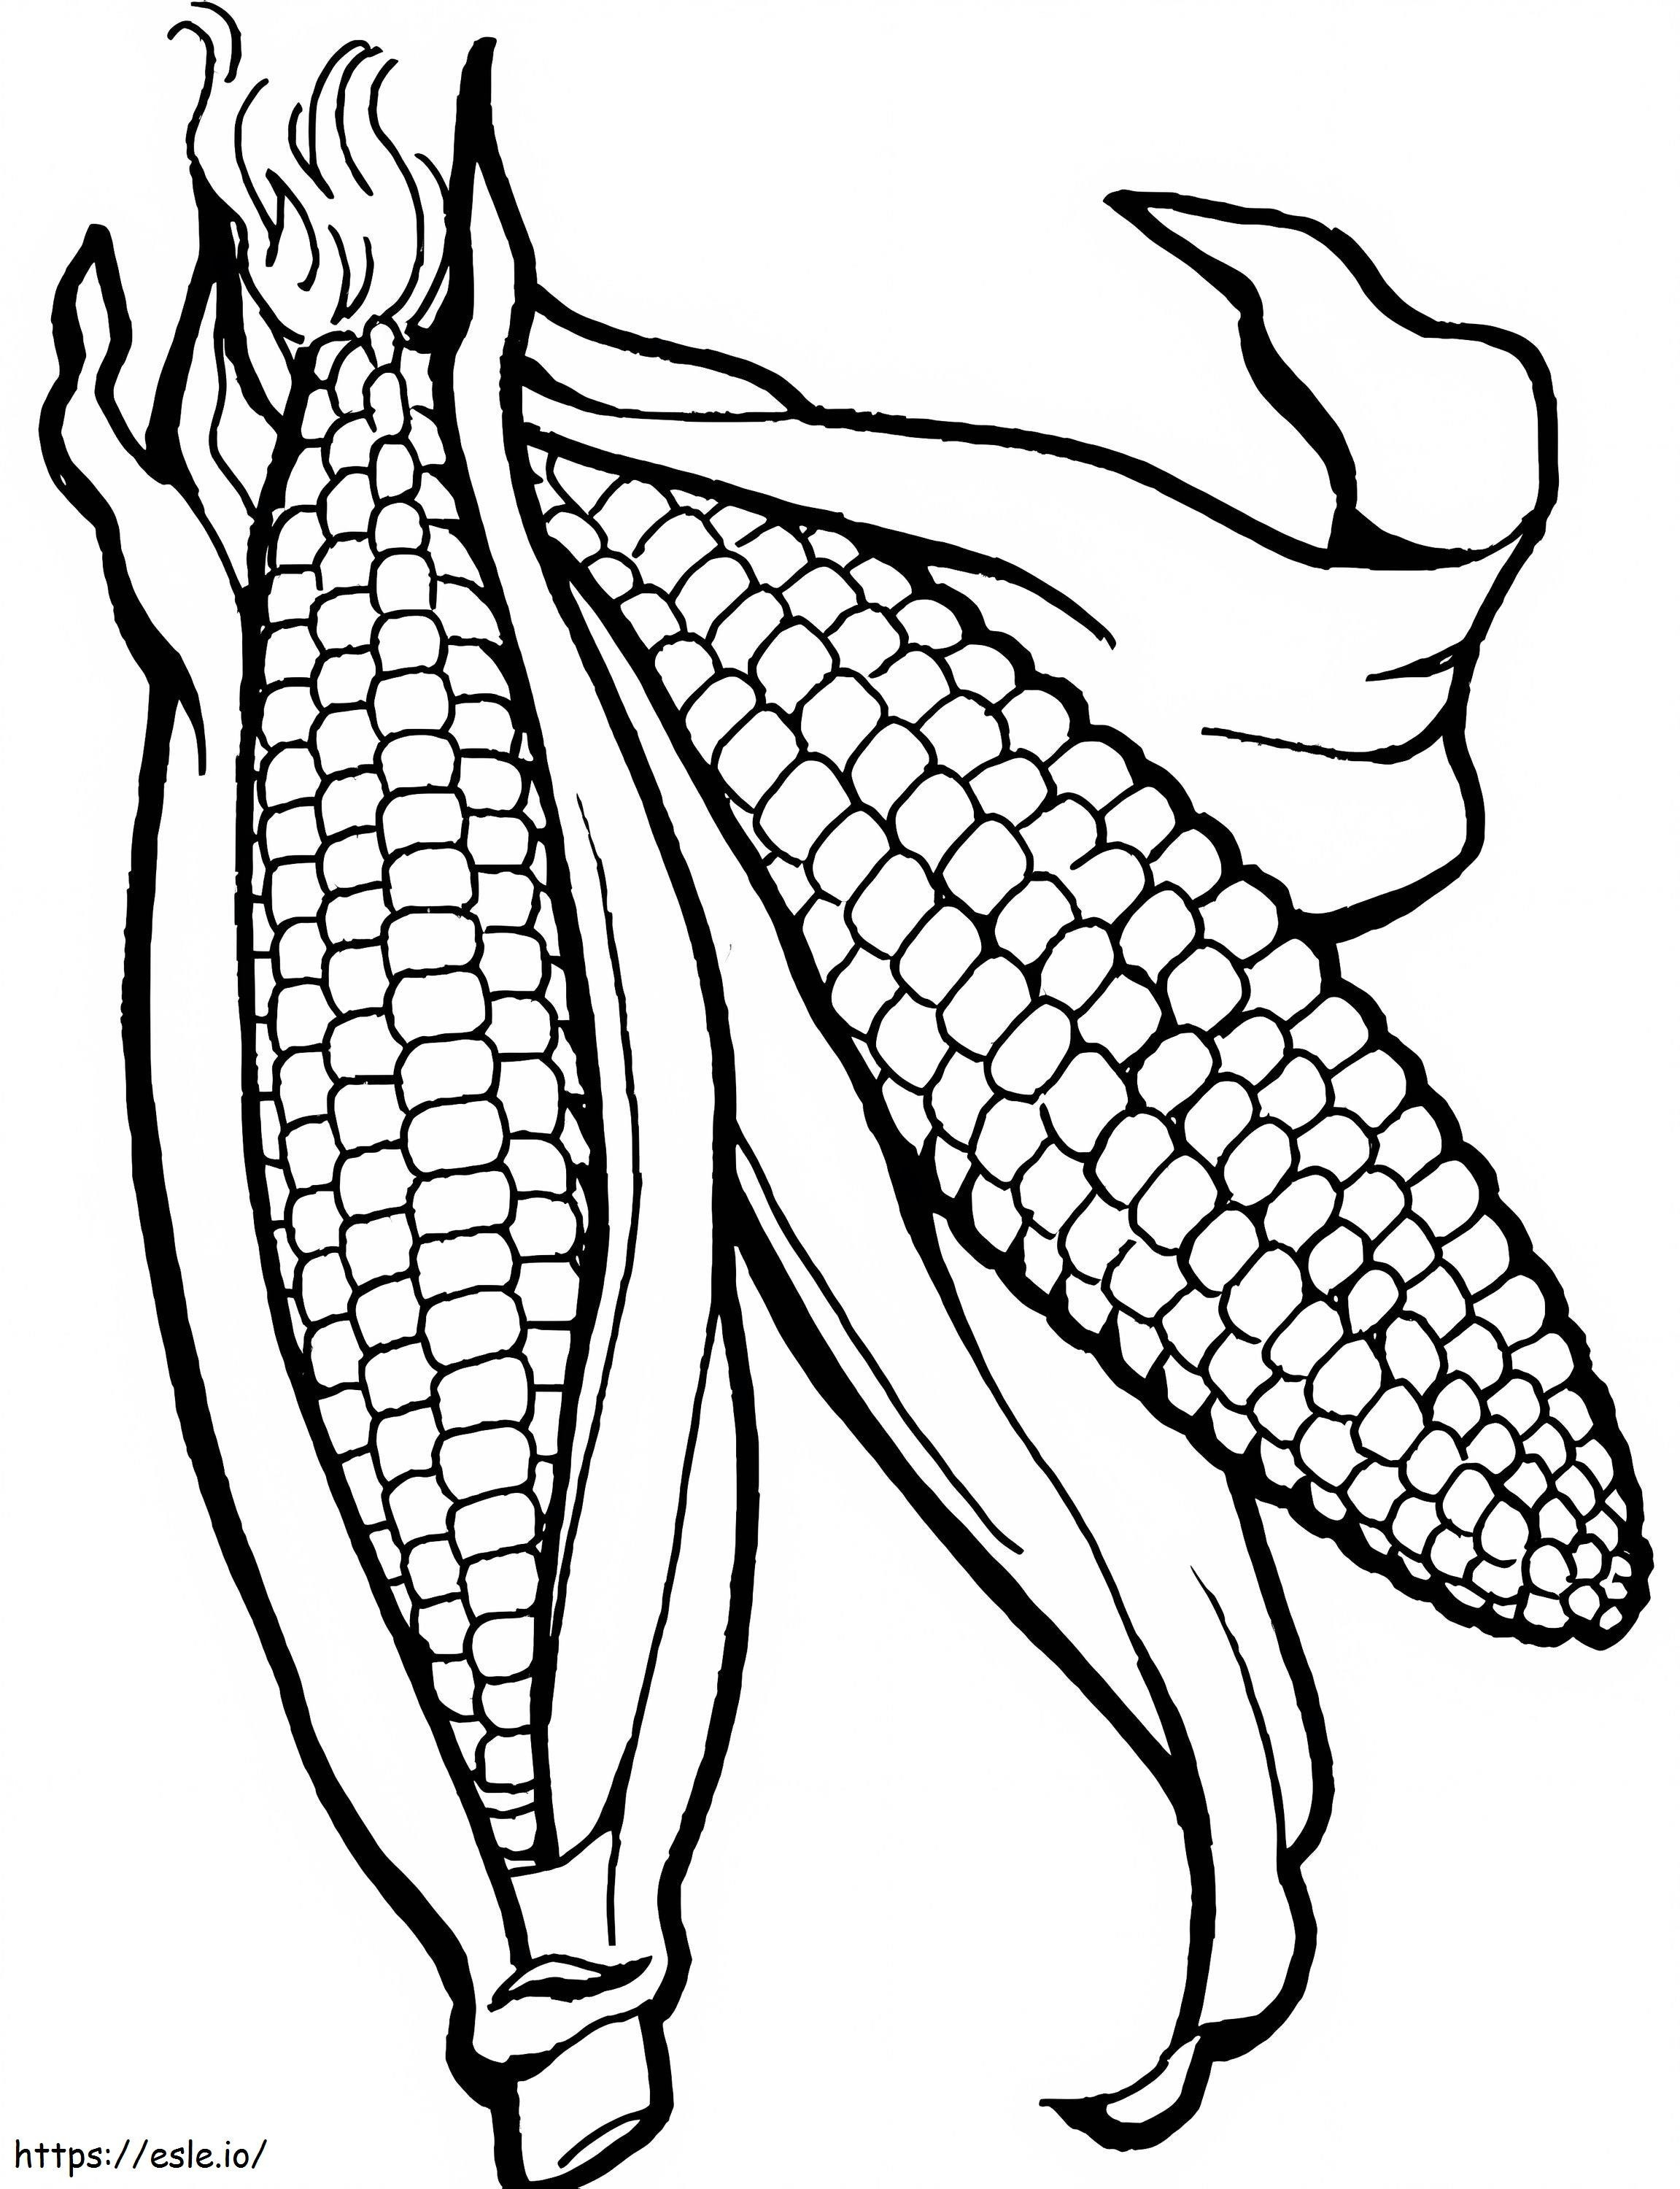 Two Corn coloring page